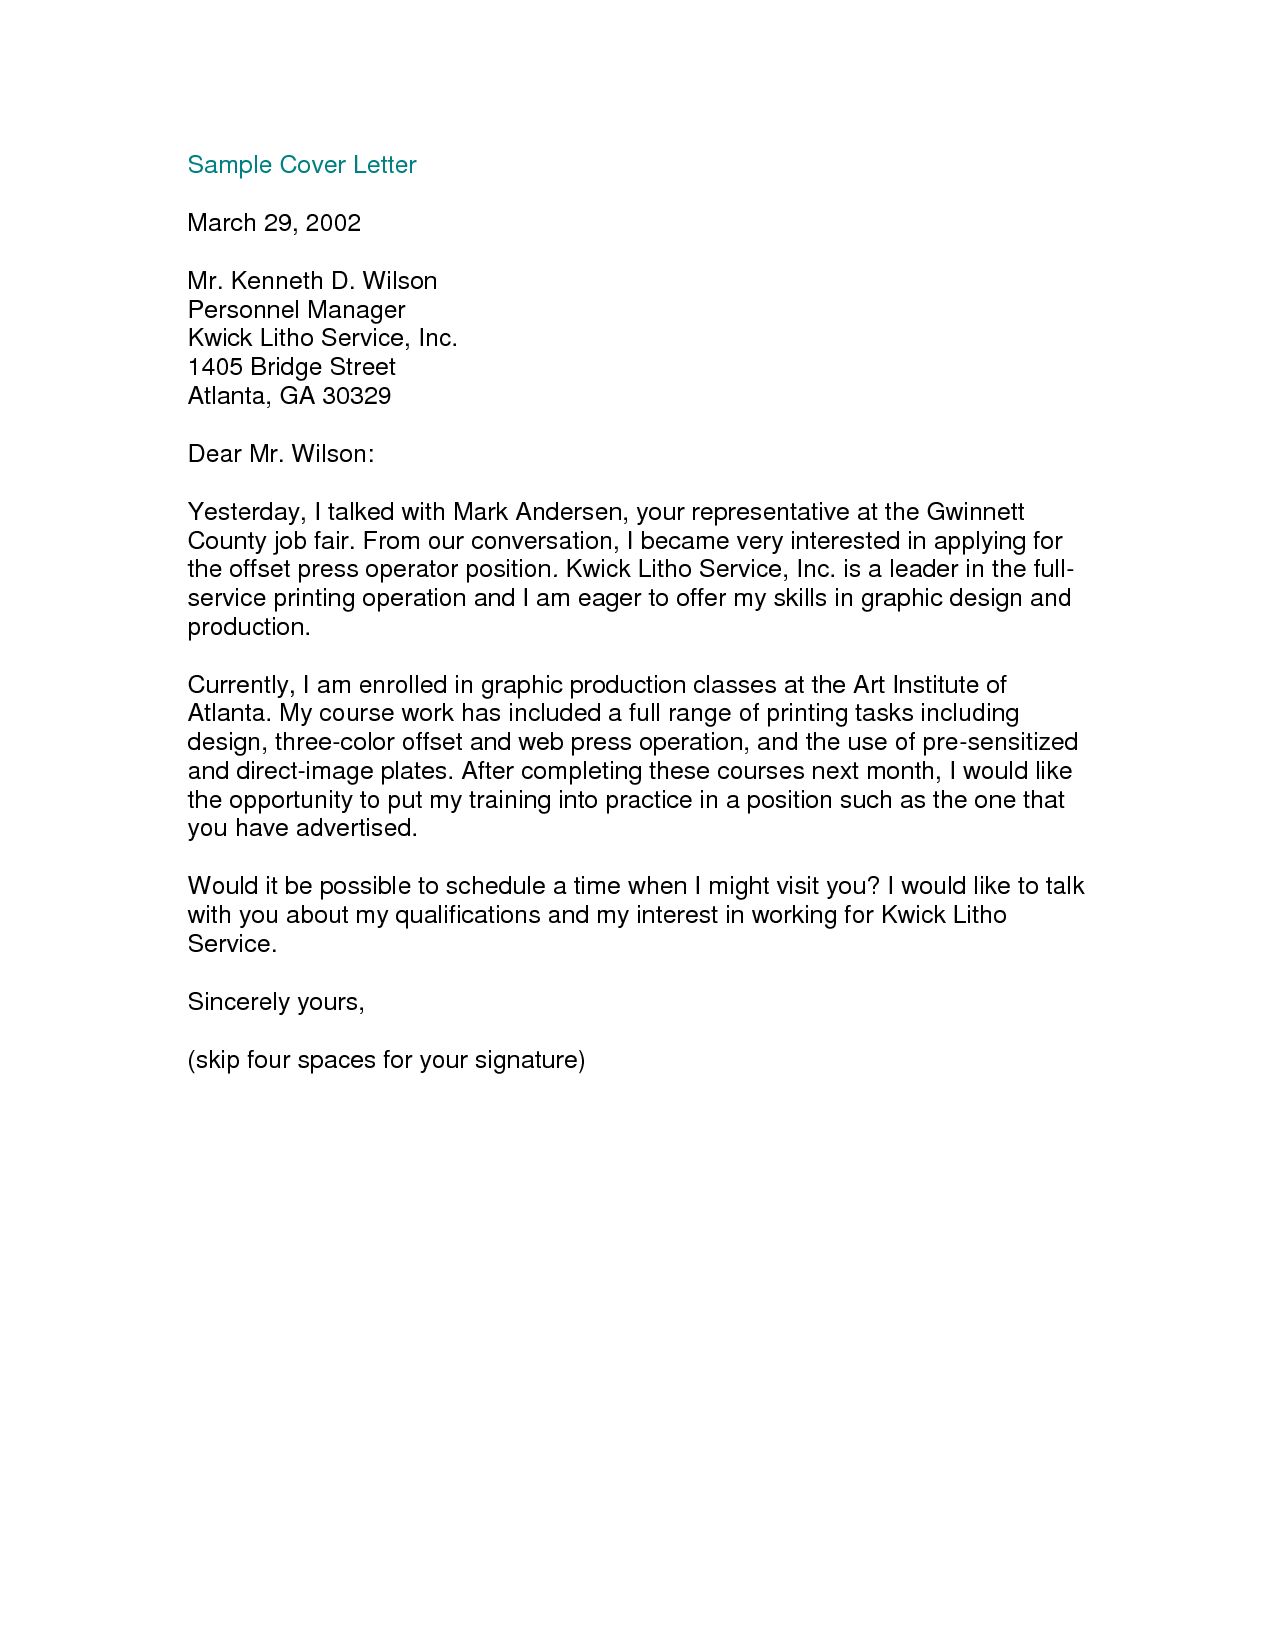 an example of an application letter to a school